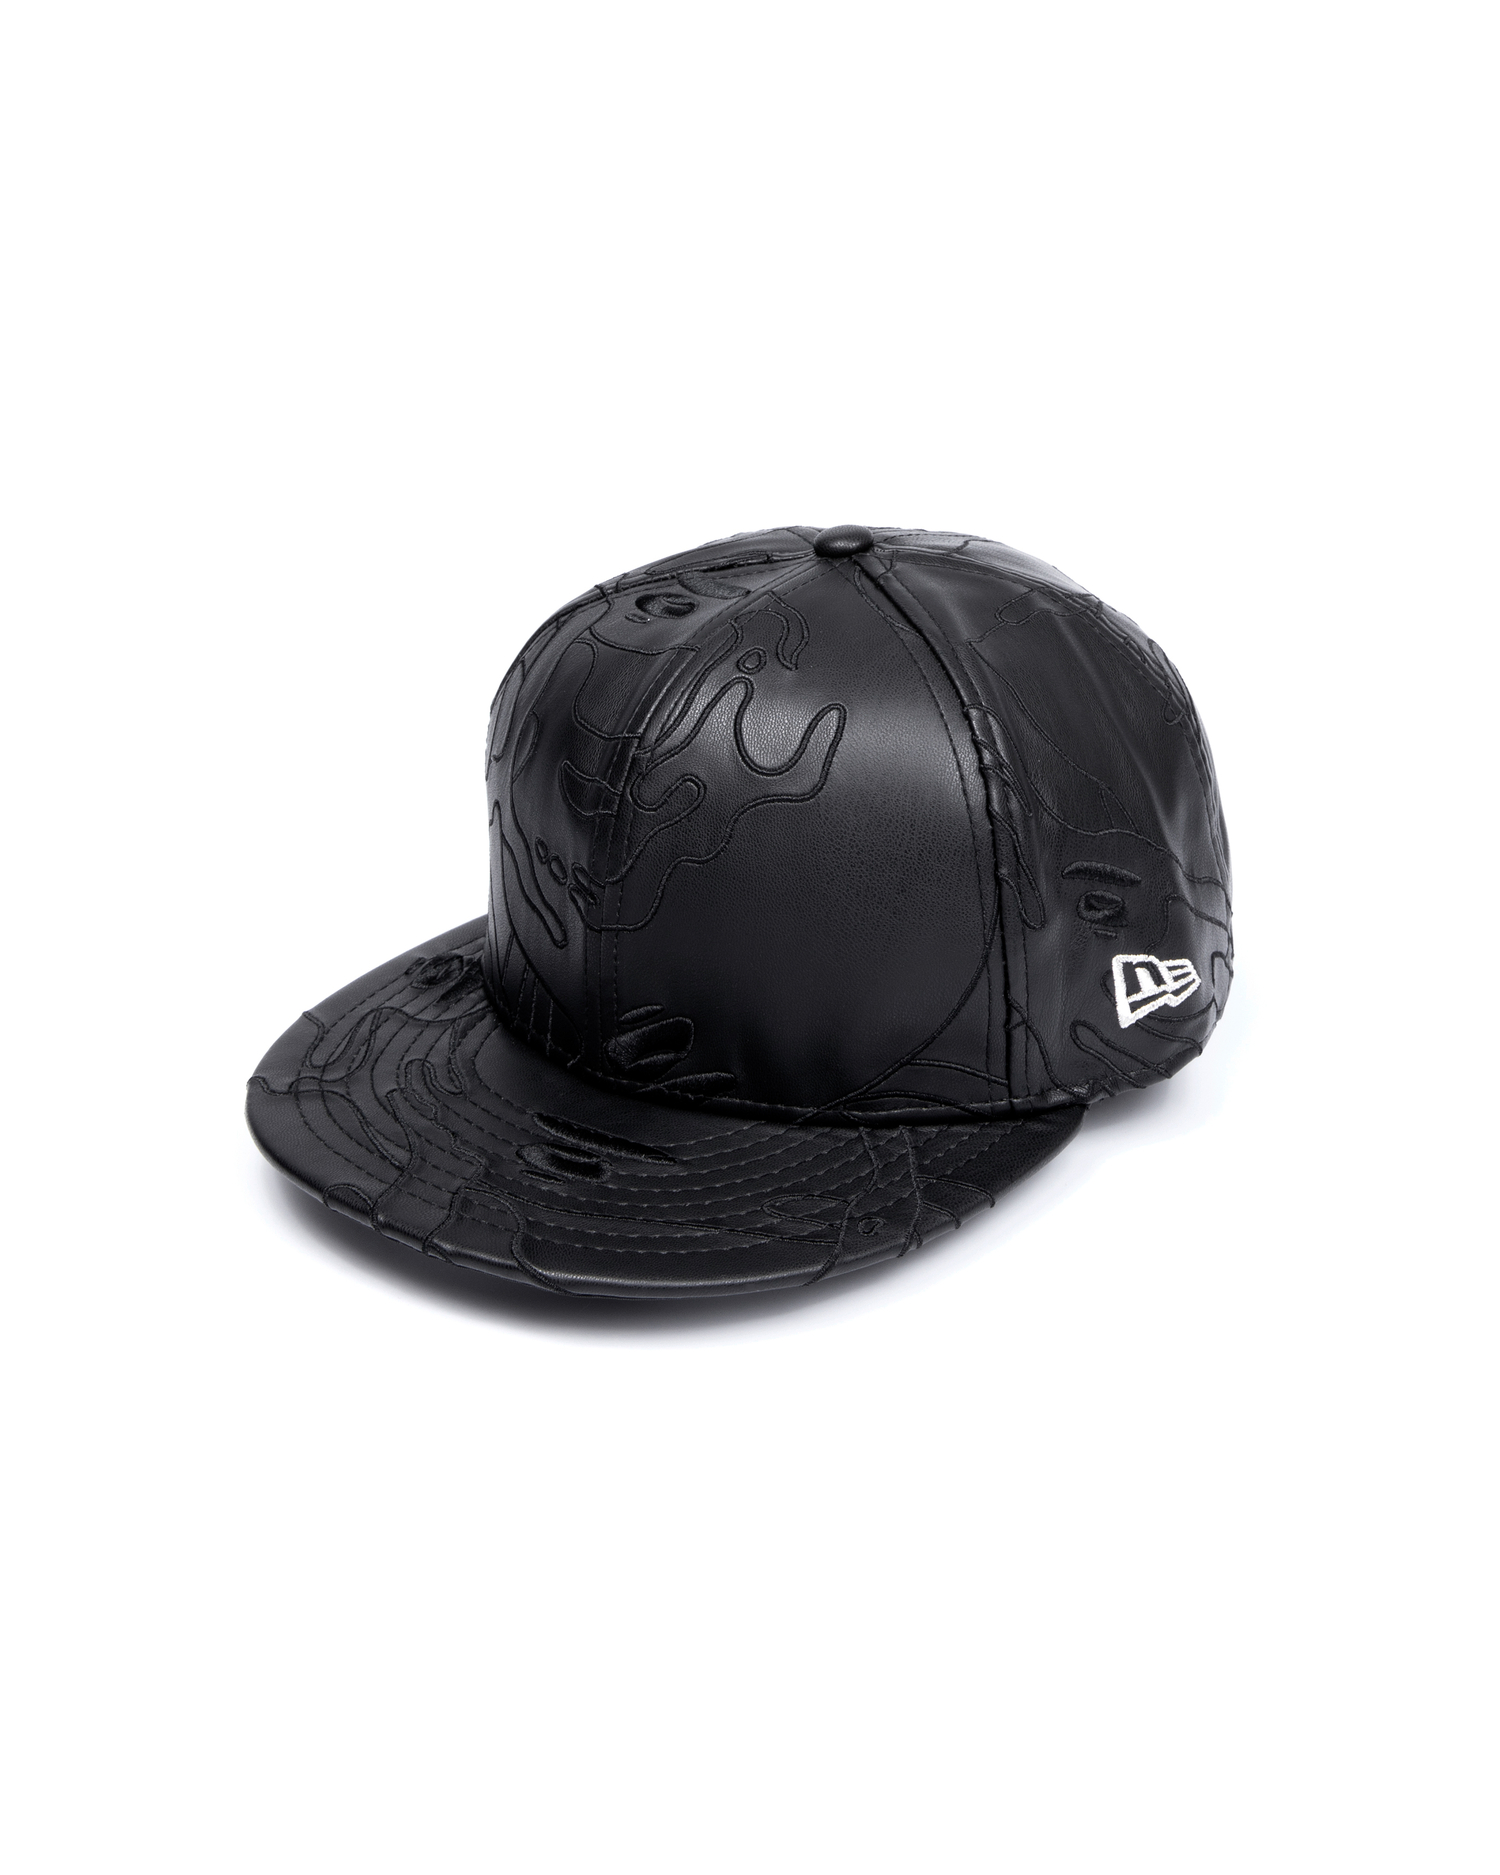 Enjoy Cut-Price AAPE Best Choice X New Era Embroidered cap at ...